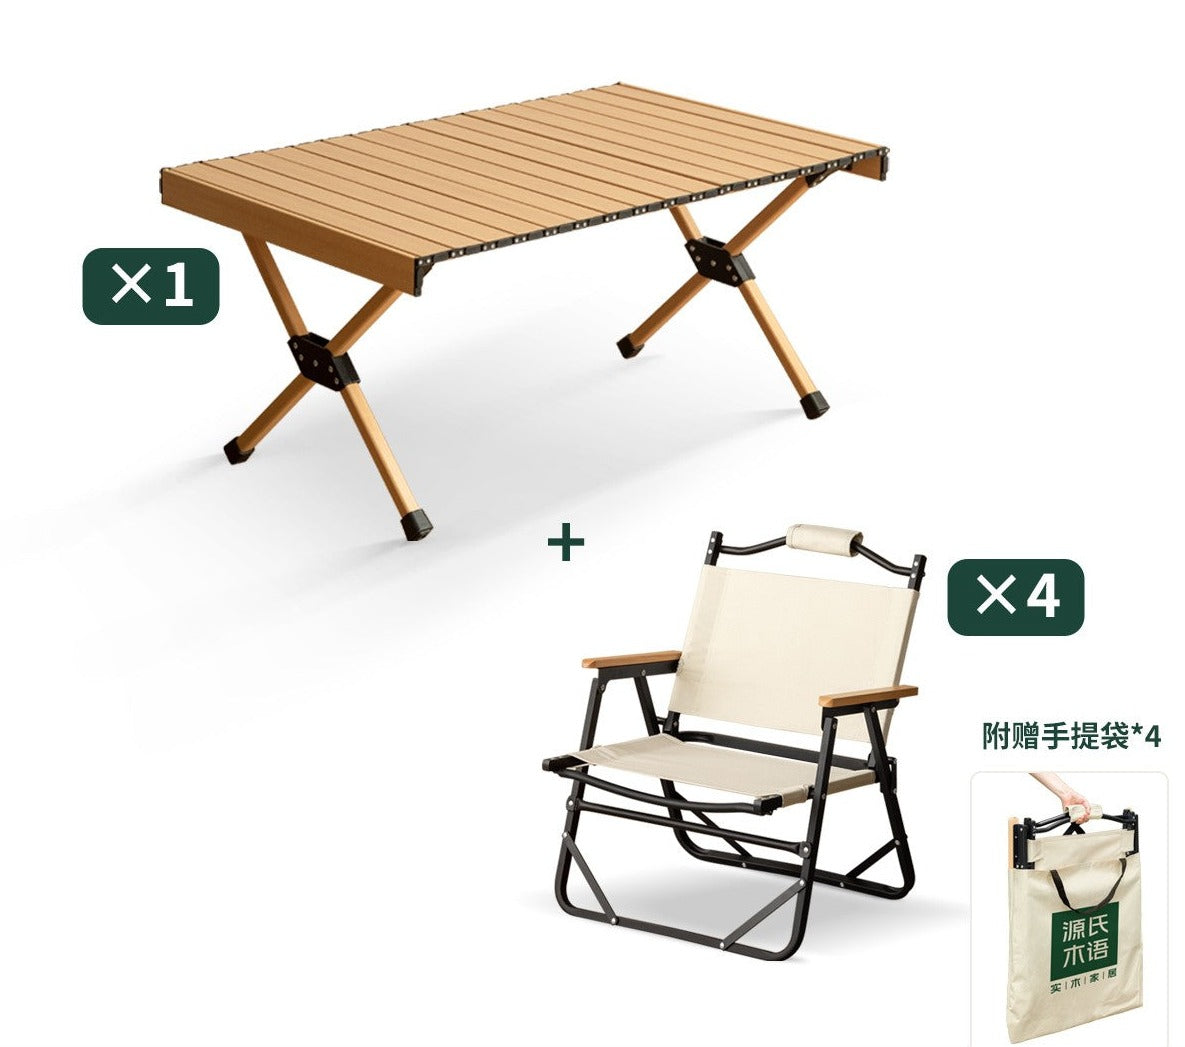 Aluminum alloy folding portable egg roll table table outdoor camping equipment  and chair set